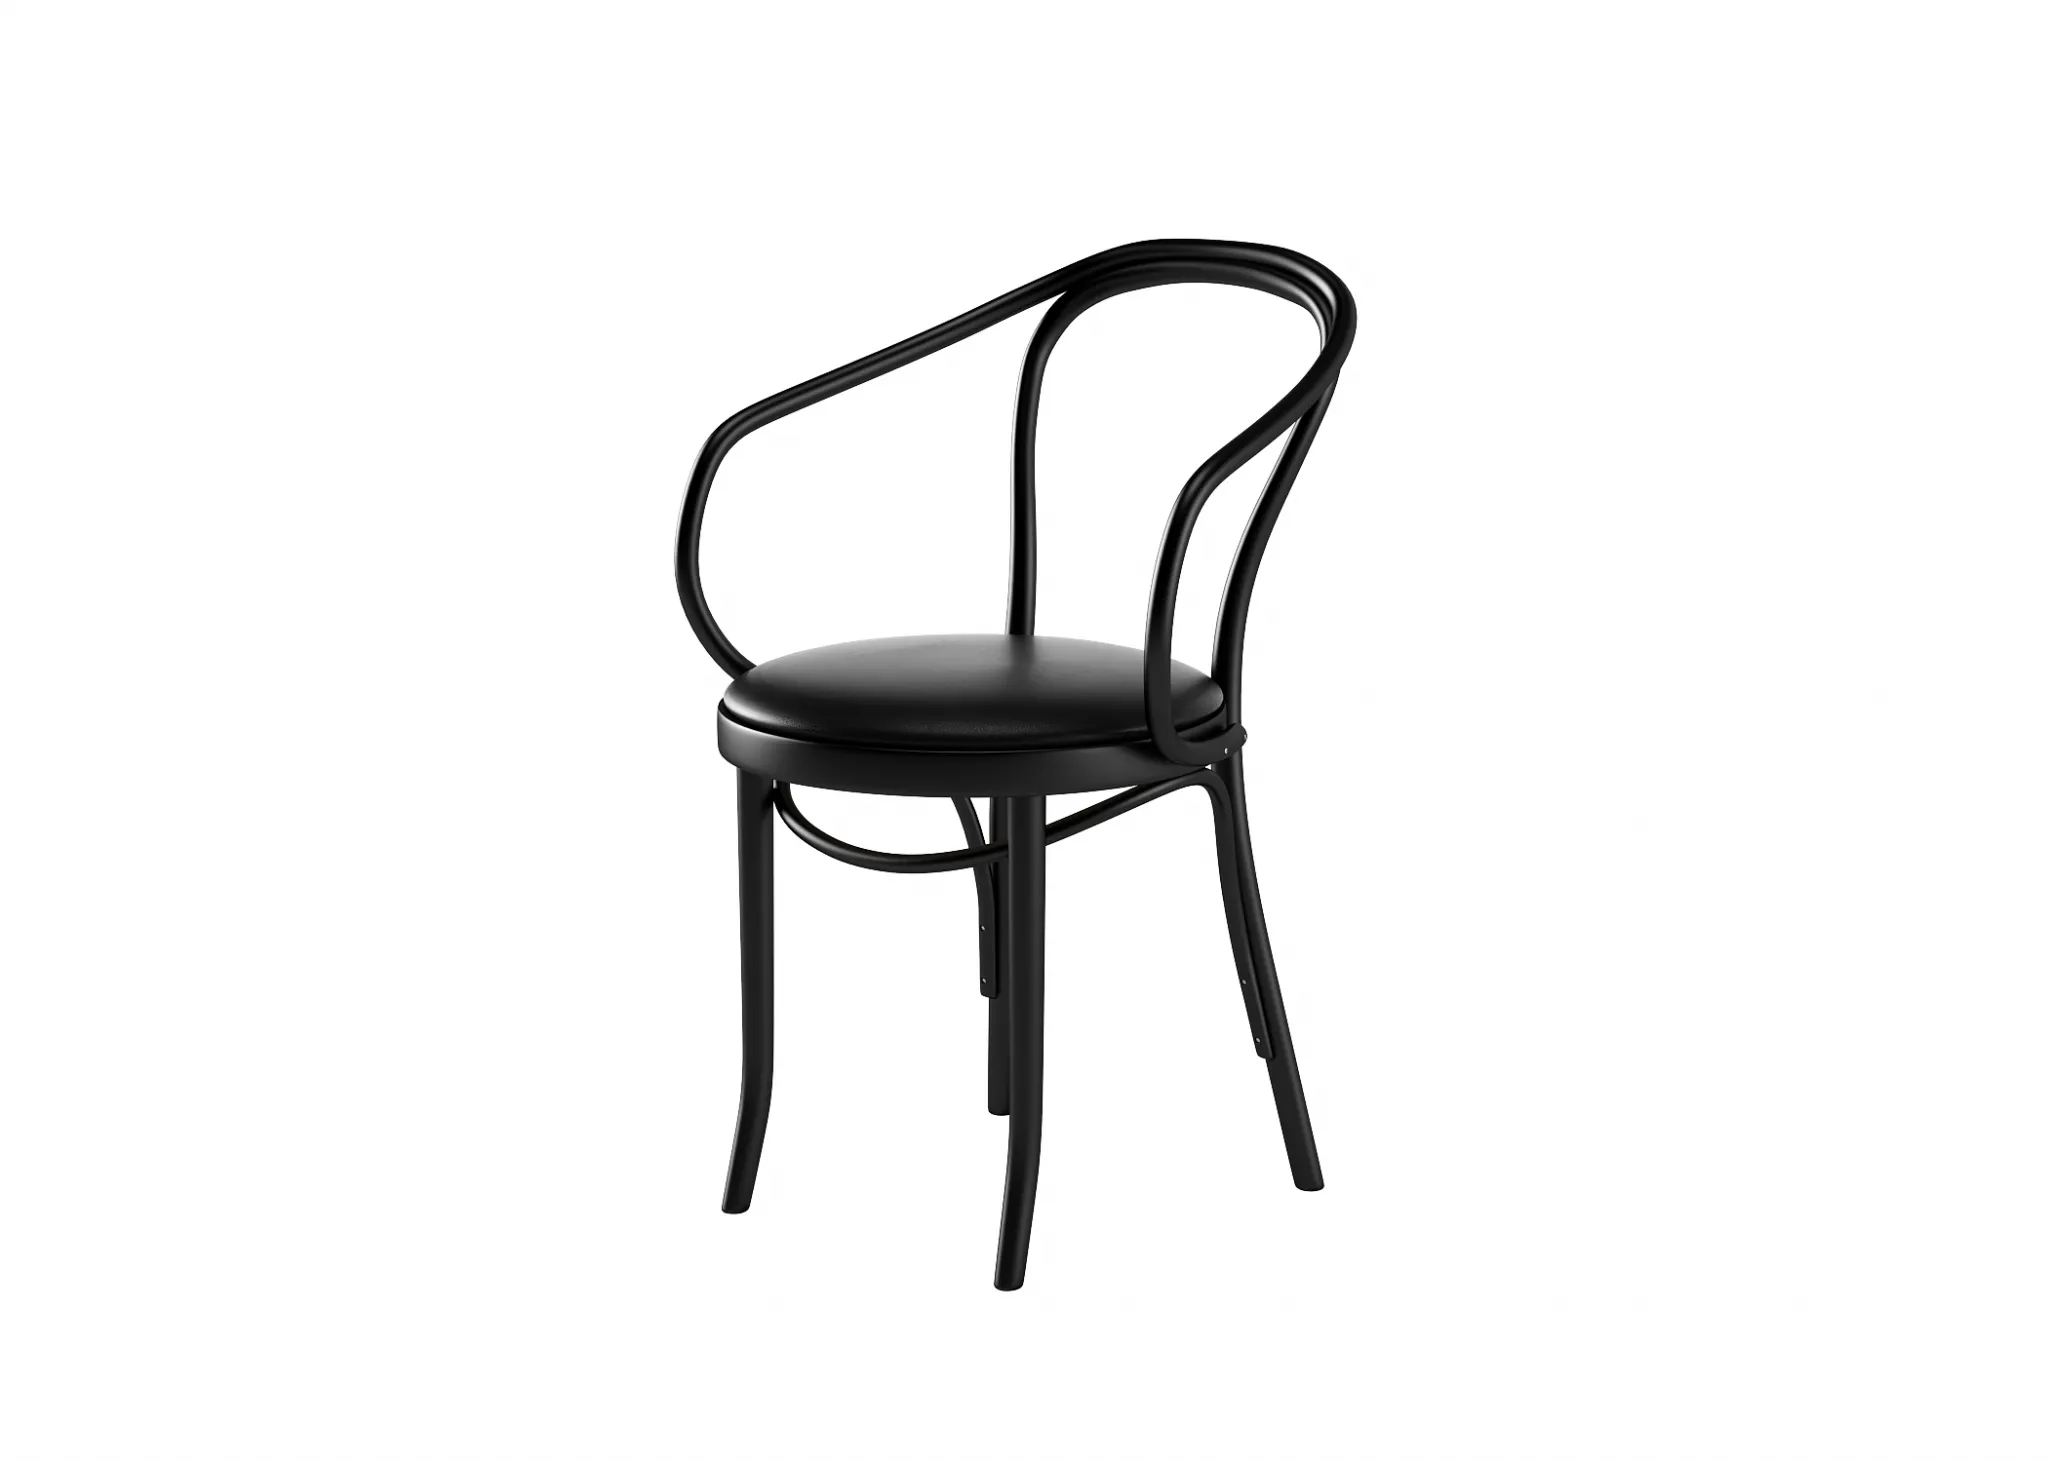 FURNITURE 3D MODELS – CHAIRS – 0407